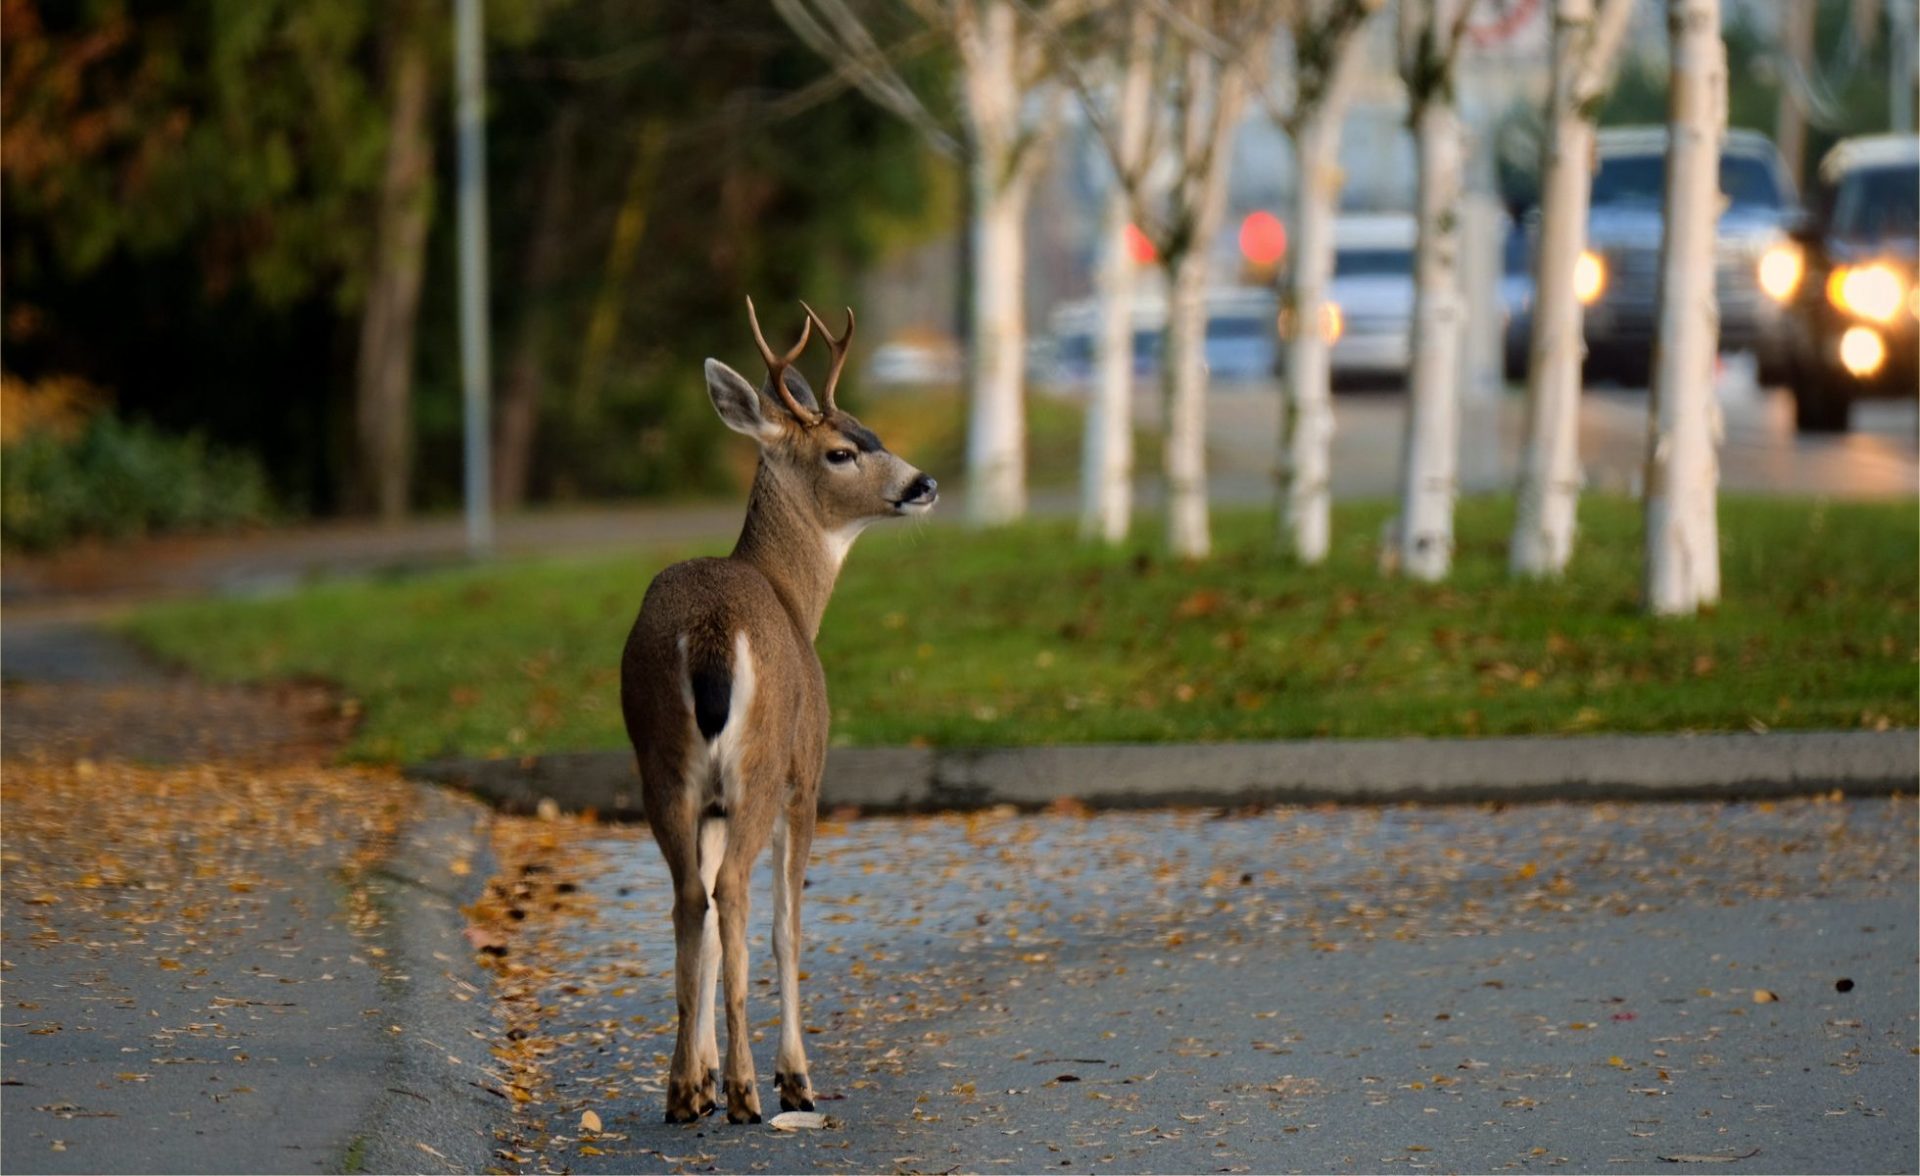 Young deer on side road looking out into rush hour